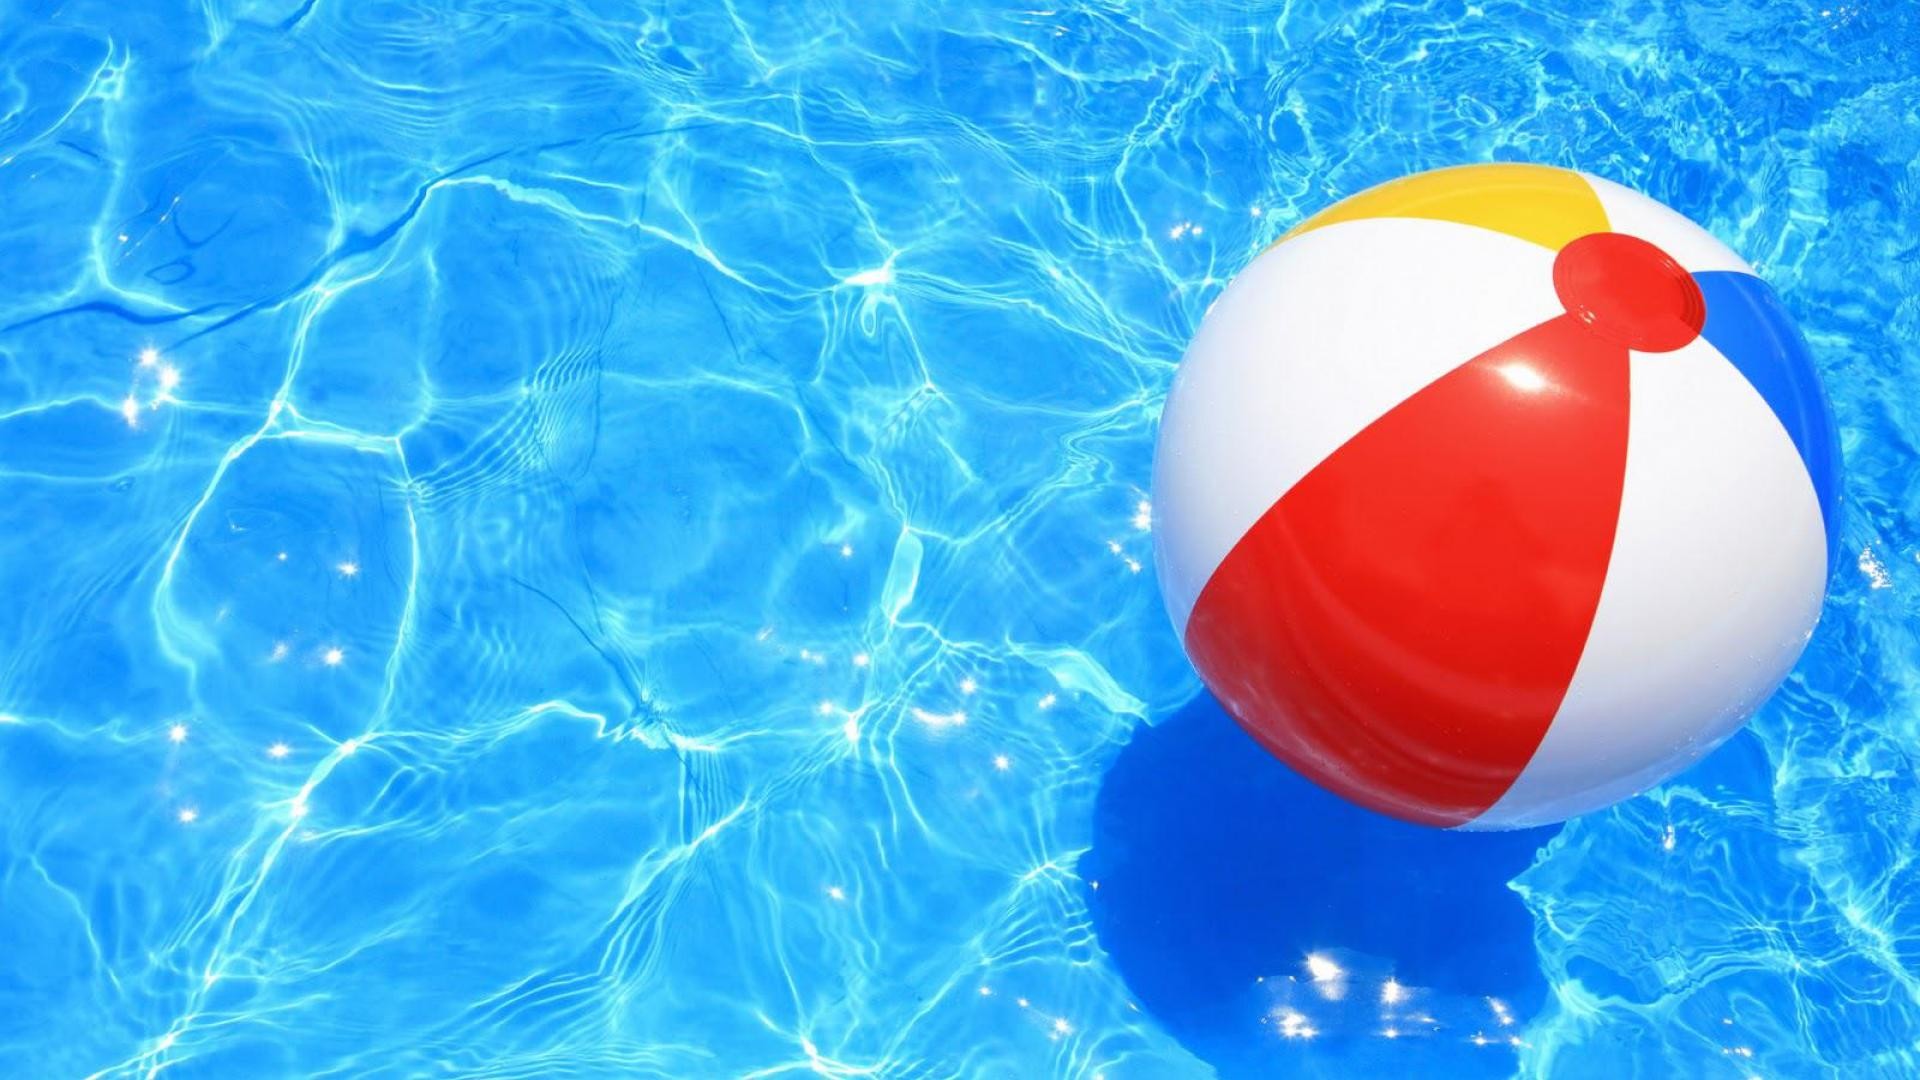 Hd Summer Picture - Pool With Beach Ball - HD Wallpaper 